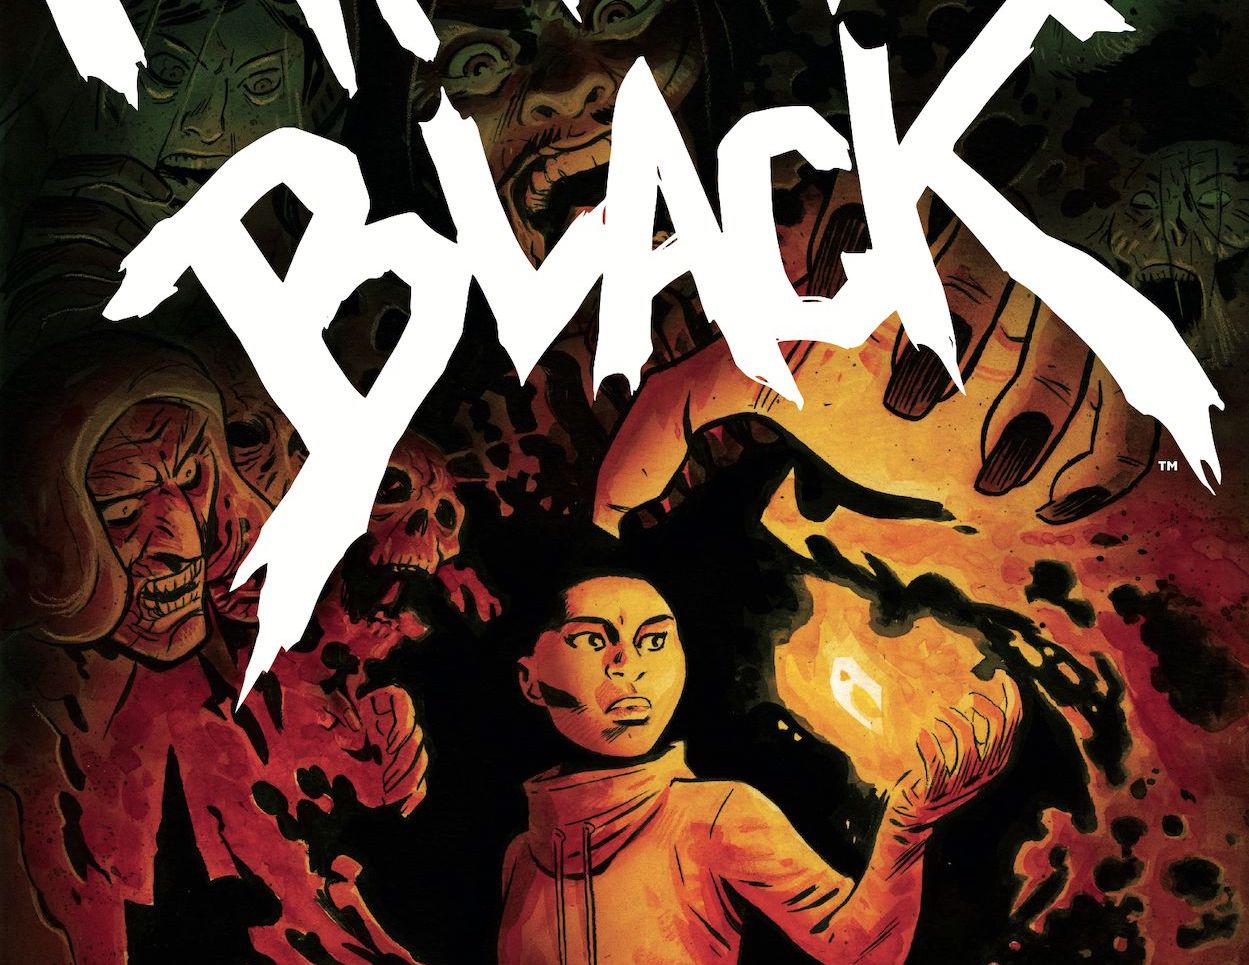 EXCLUSIVE Dark Horse Preview: Manor Black Fire in Blood #3